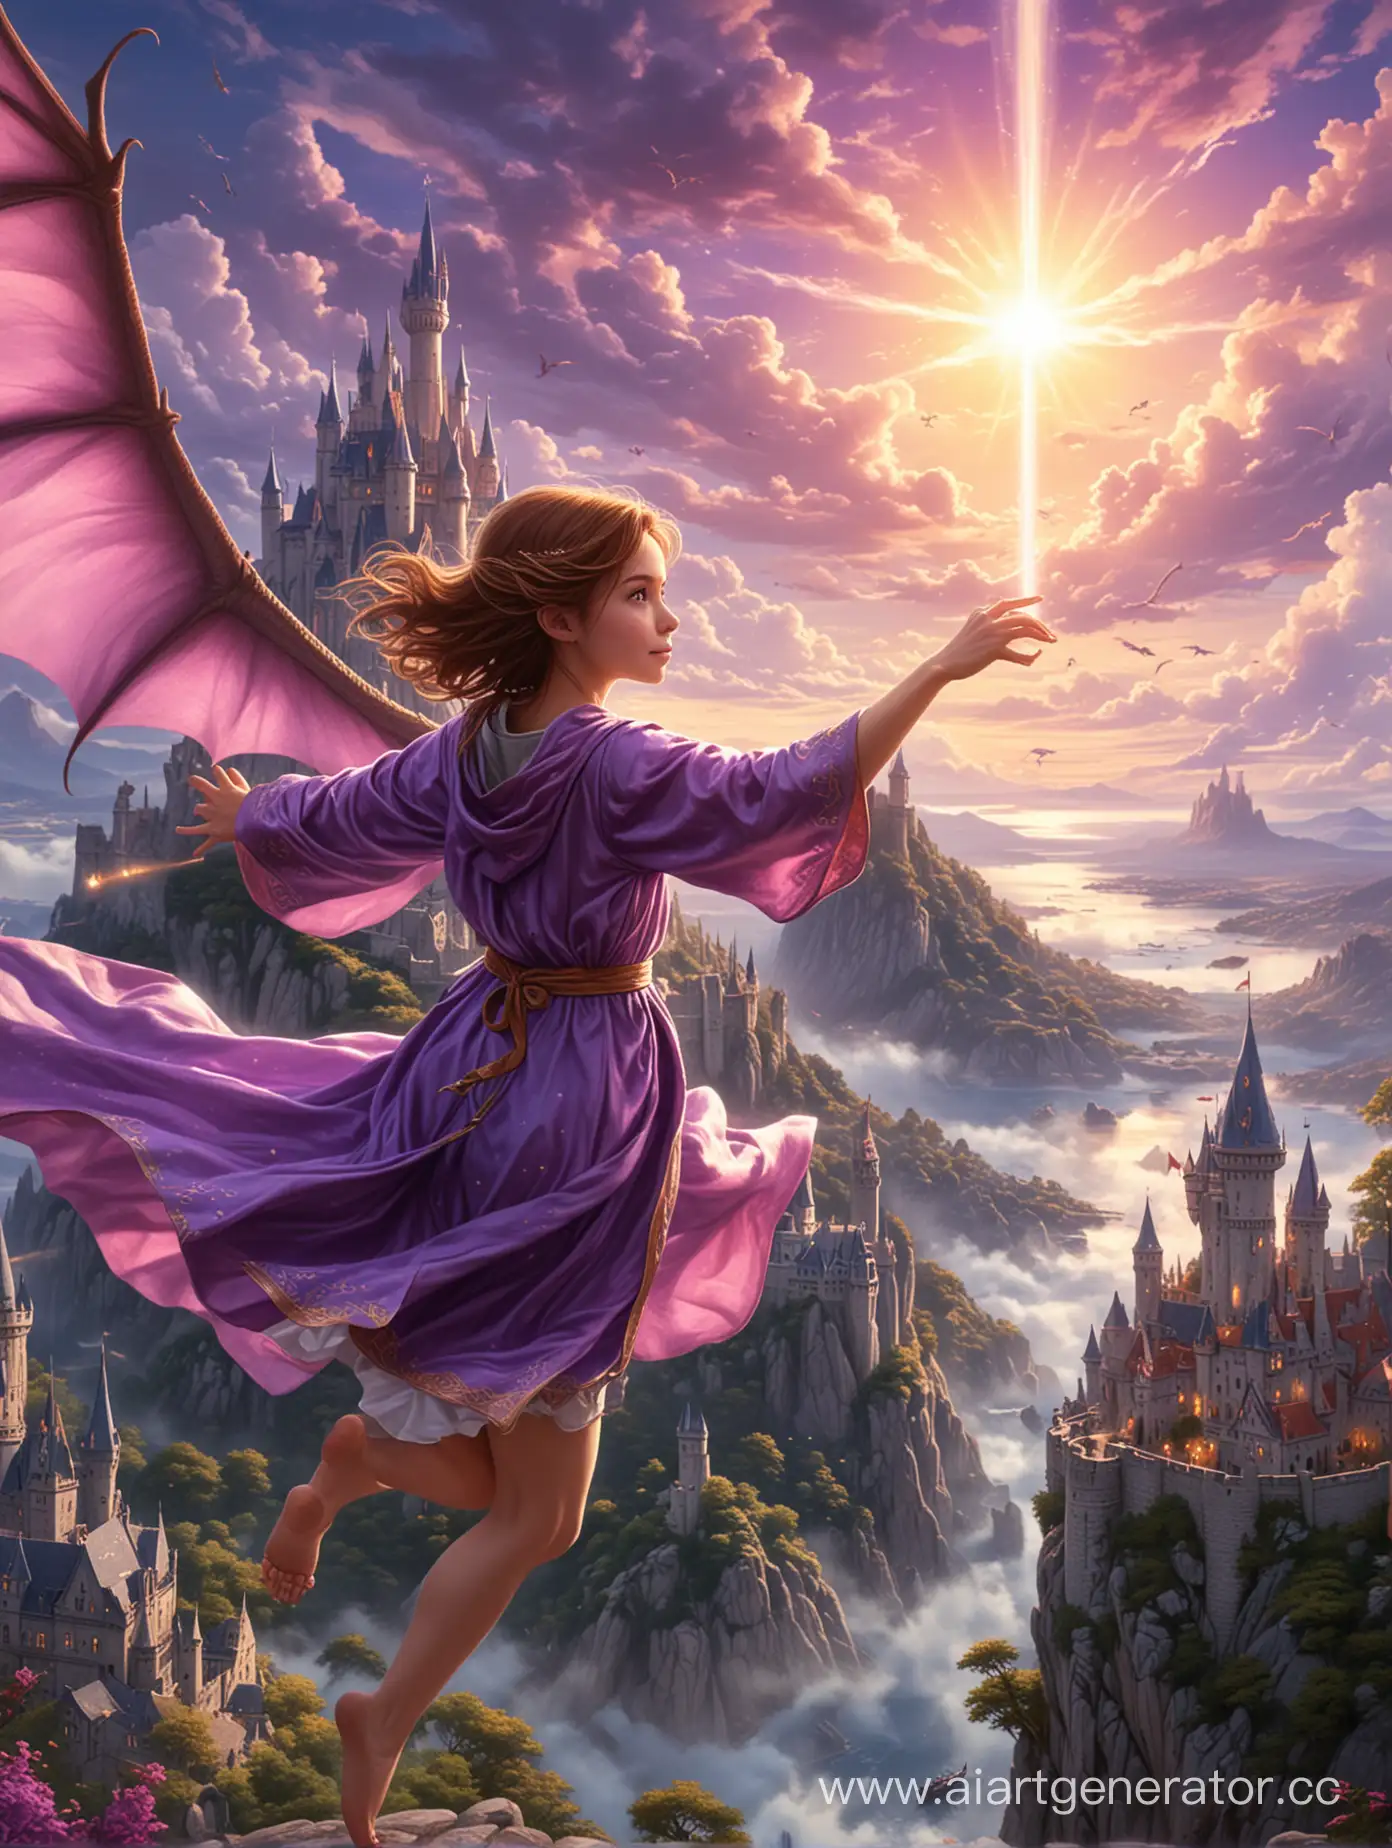 A castle is visible in the distance, and a dragon is flying in the sky above it. In front is a girl with brown hair, in whose hands a magical light shines. She's wearing a purple robe.